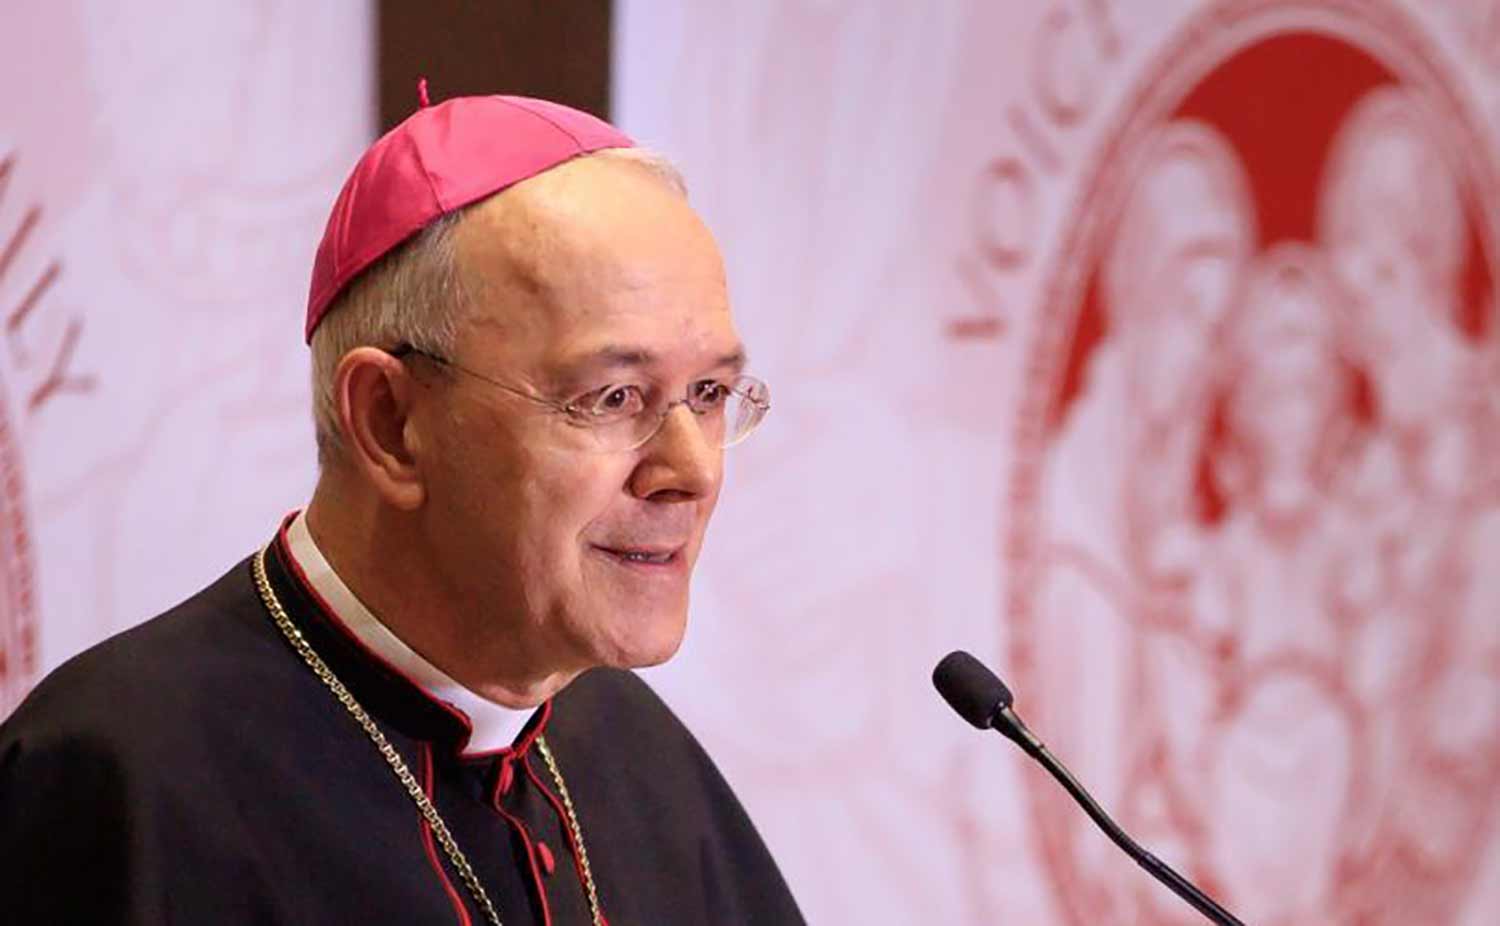 Three cardinals join global appeal decrying crackdown on basic freedoms over coronavirus